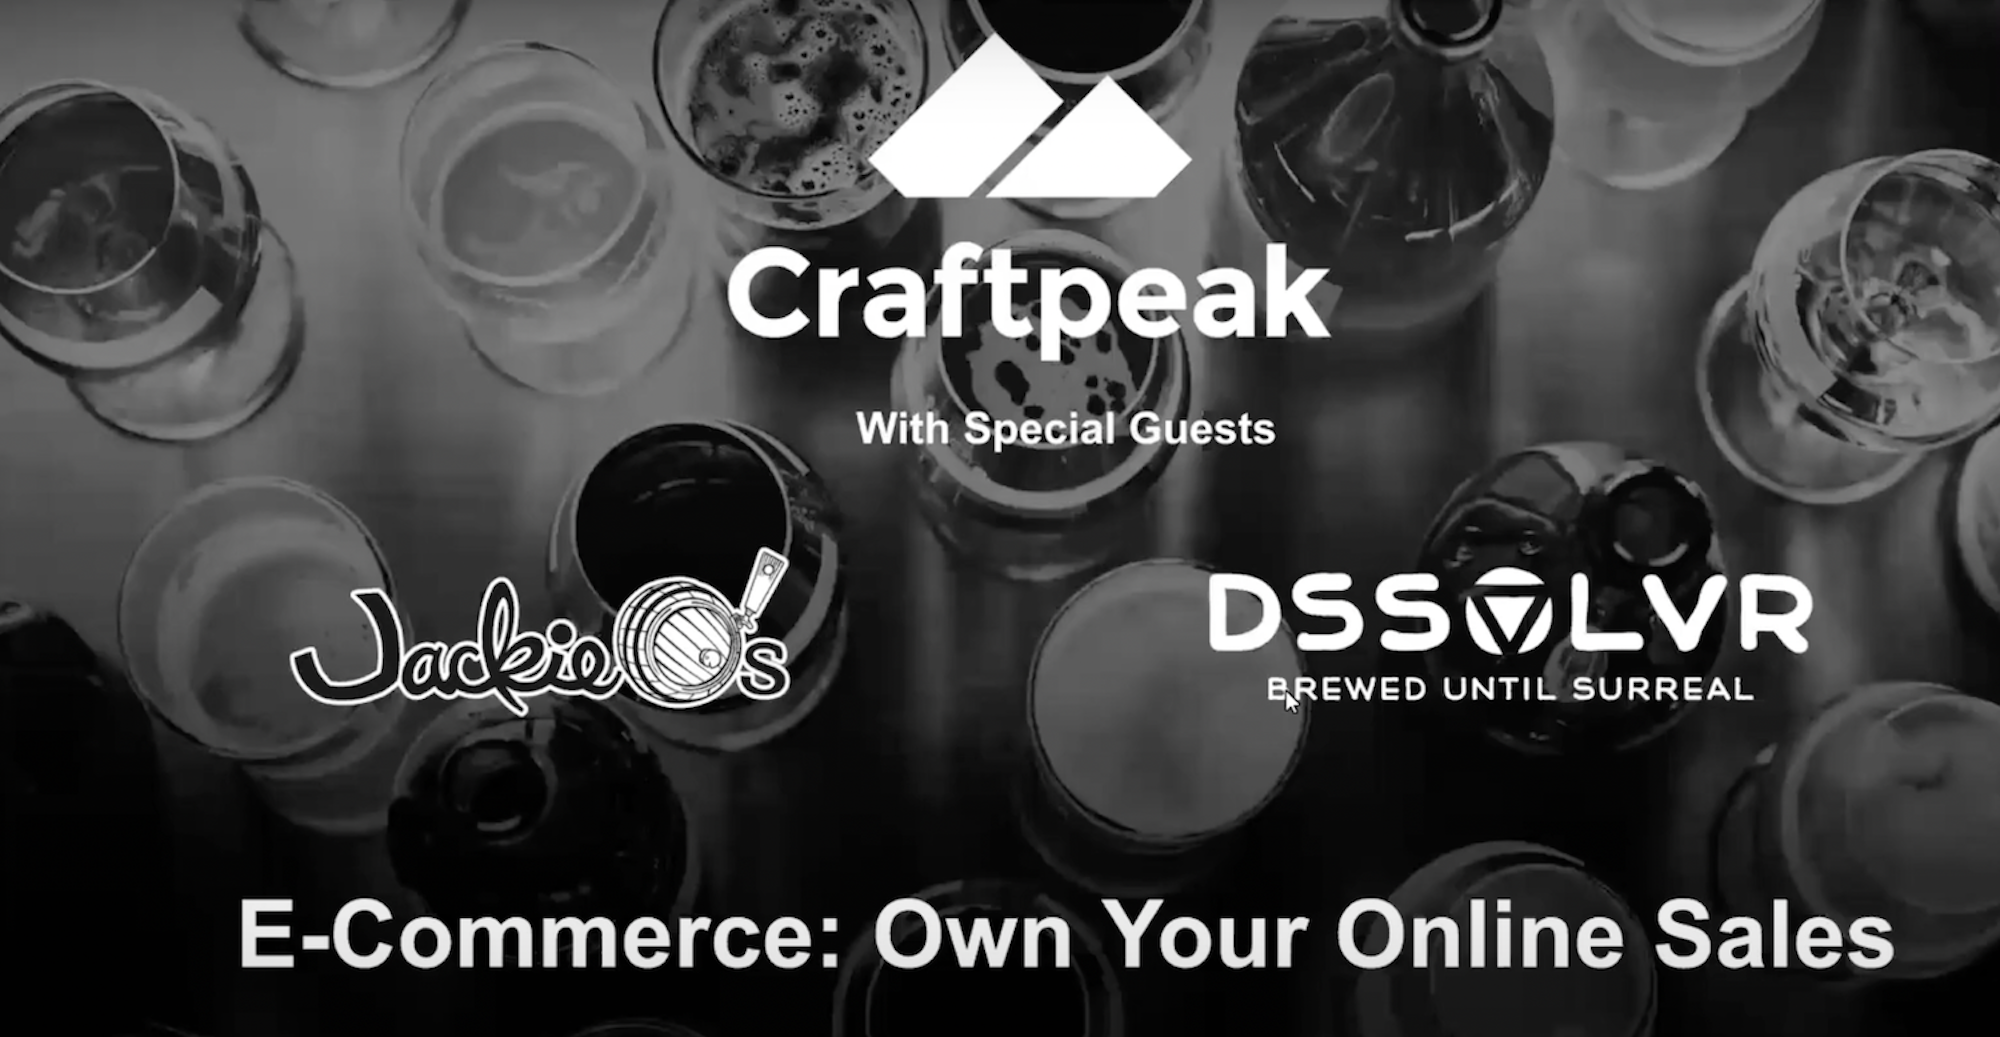 Ecommerce: Own Your Online Sales